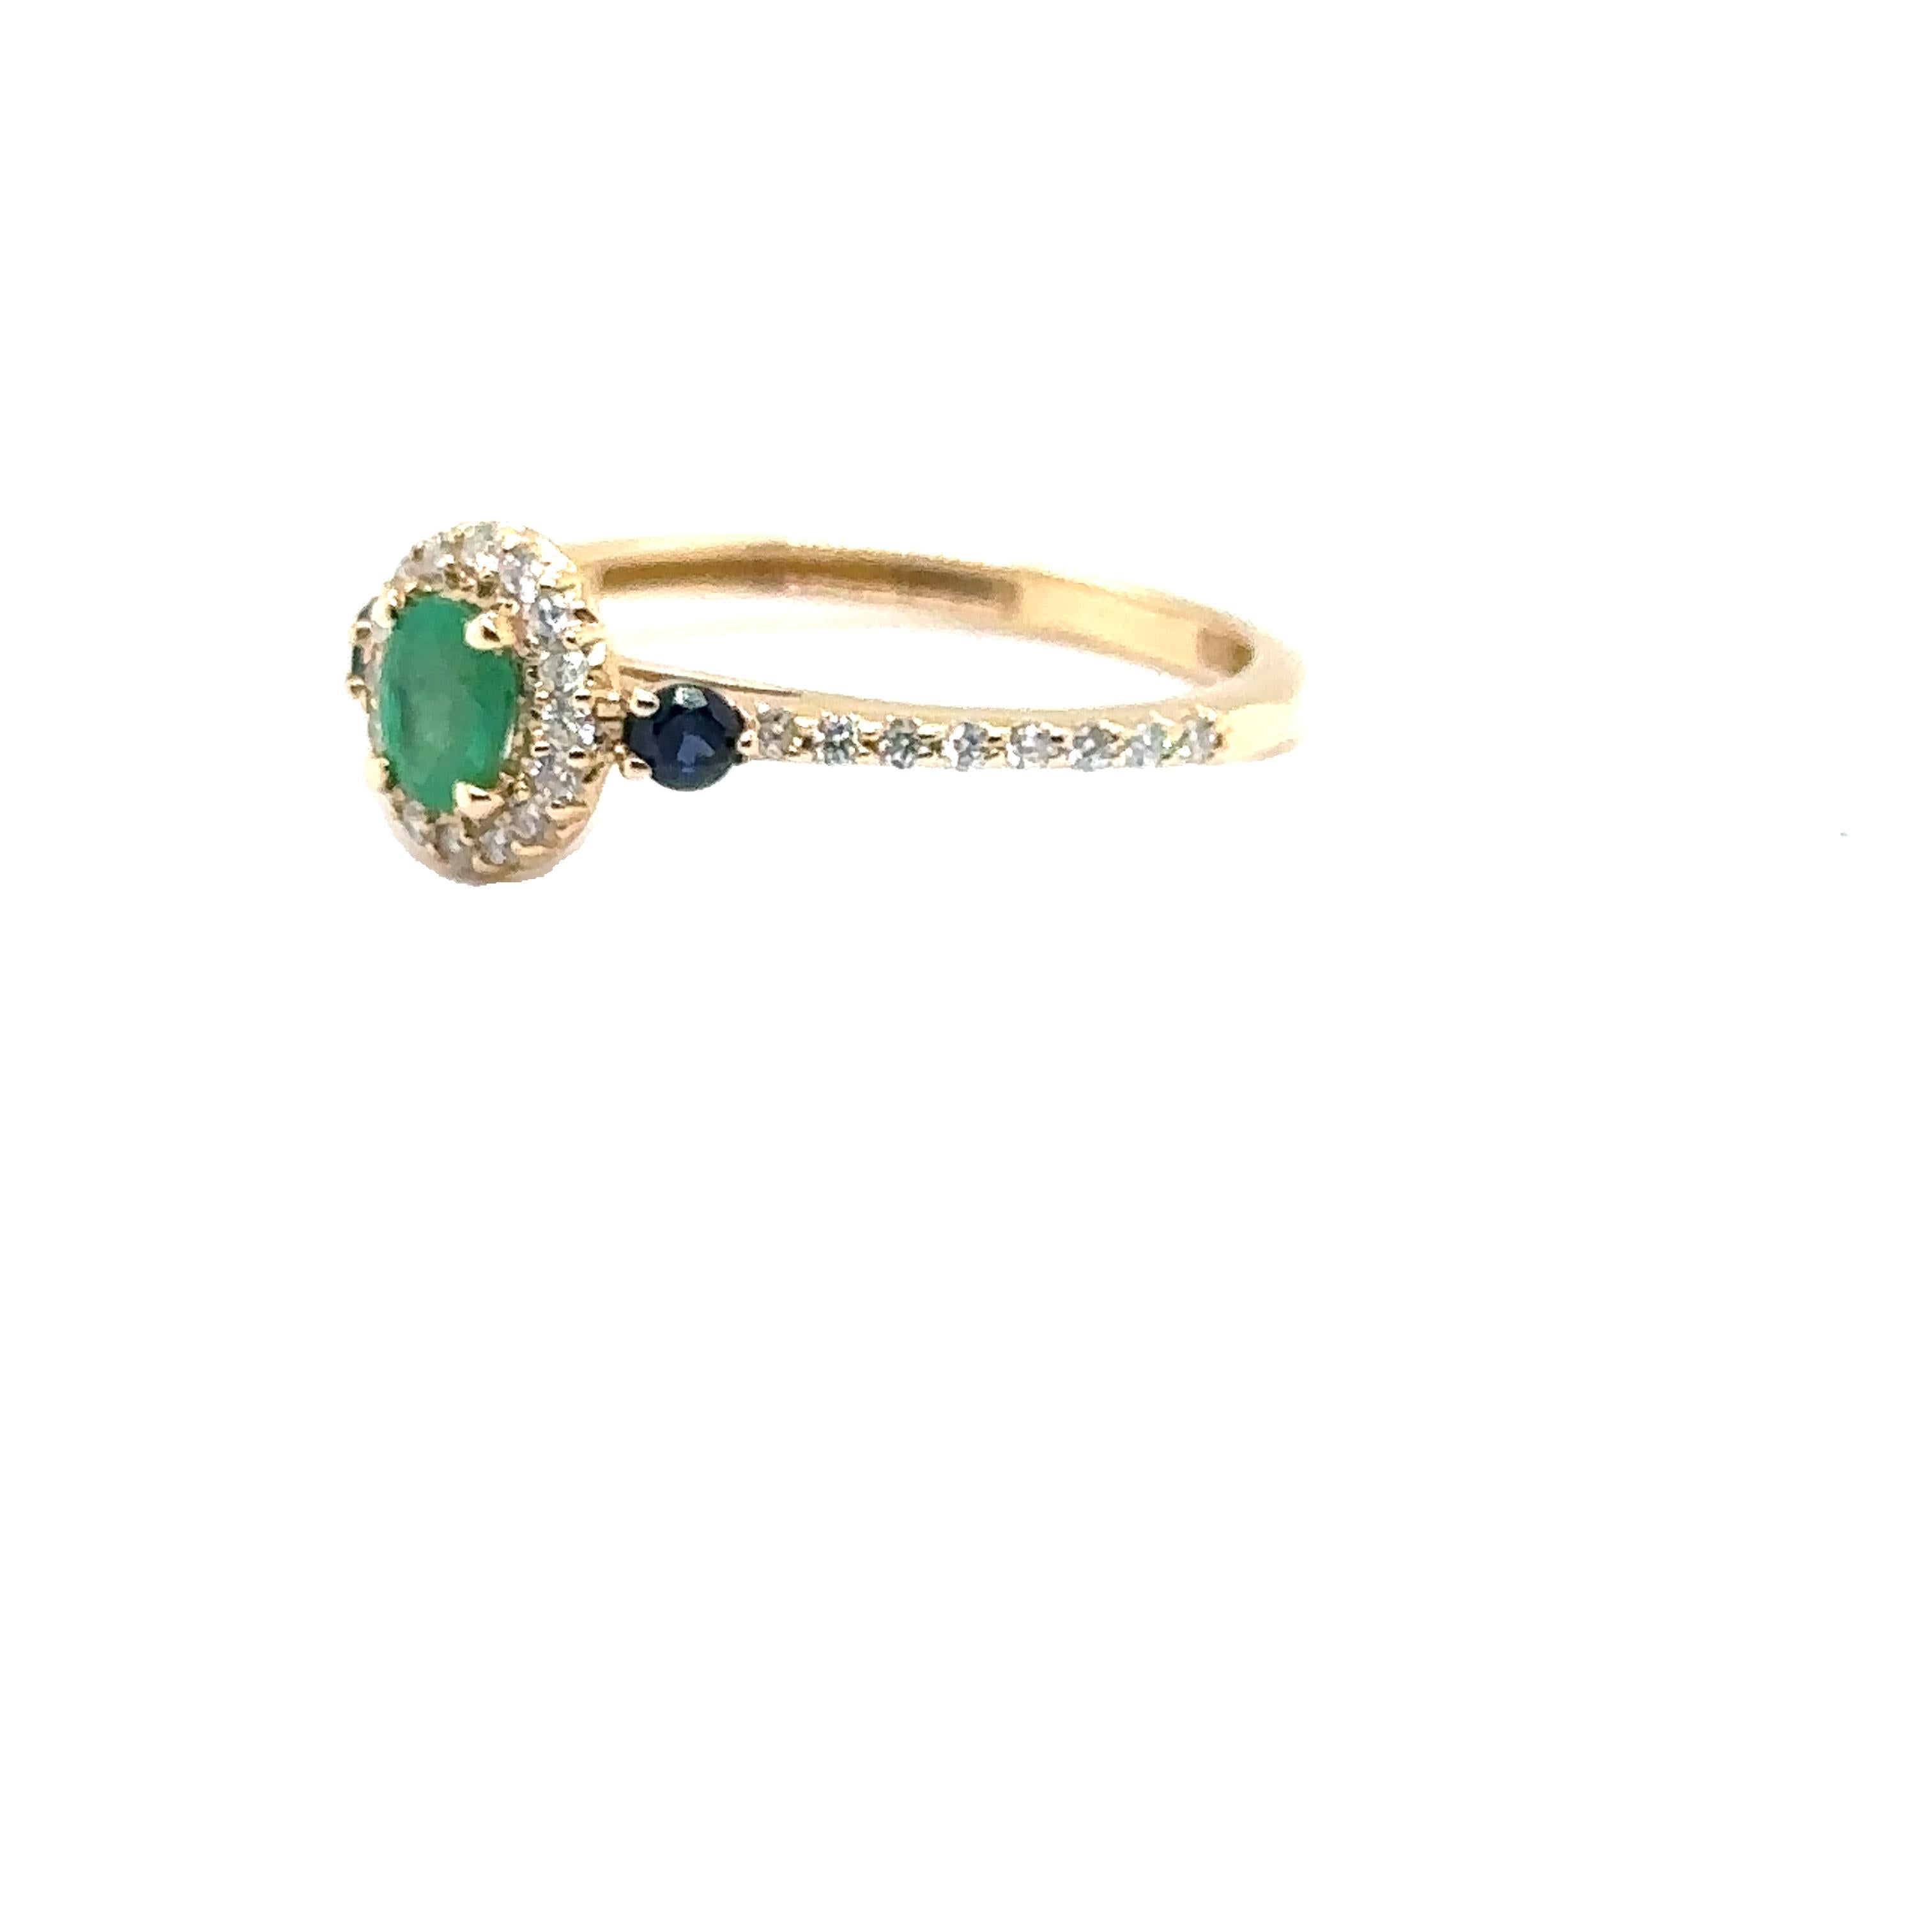 JAS-20-2134 - 14K YELLOW GOLD EMERALD RING with SAPPHIRES & DIAMONDS  For Sale 1